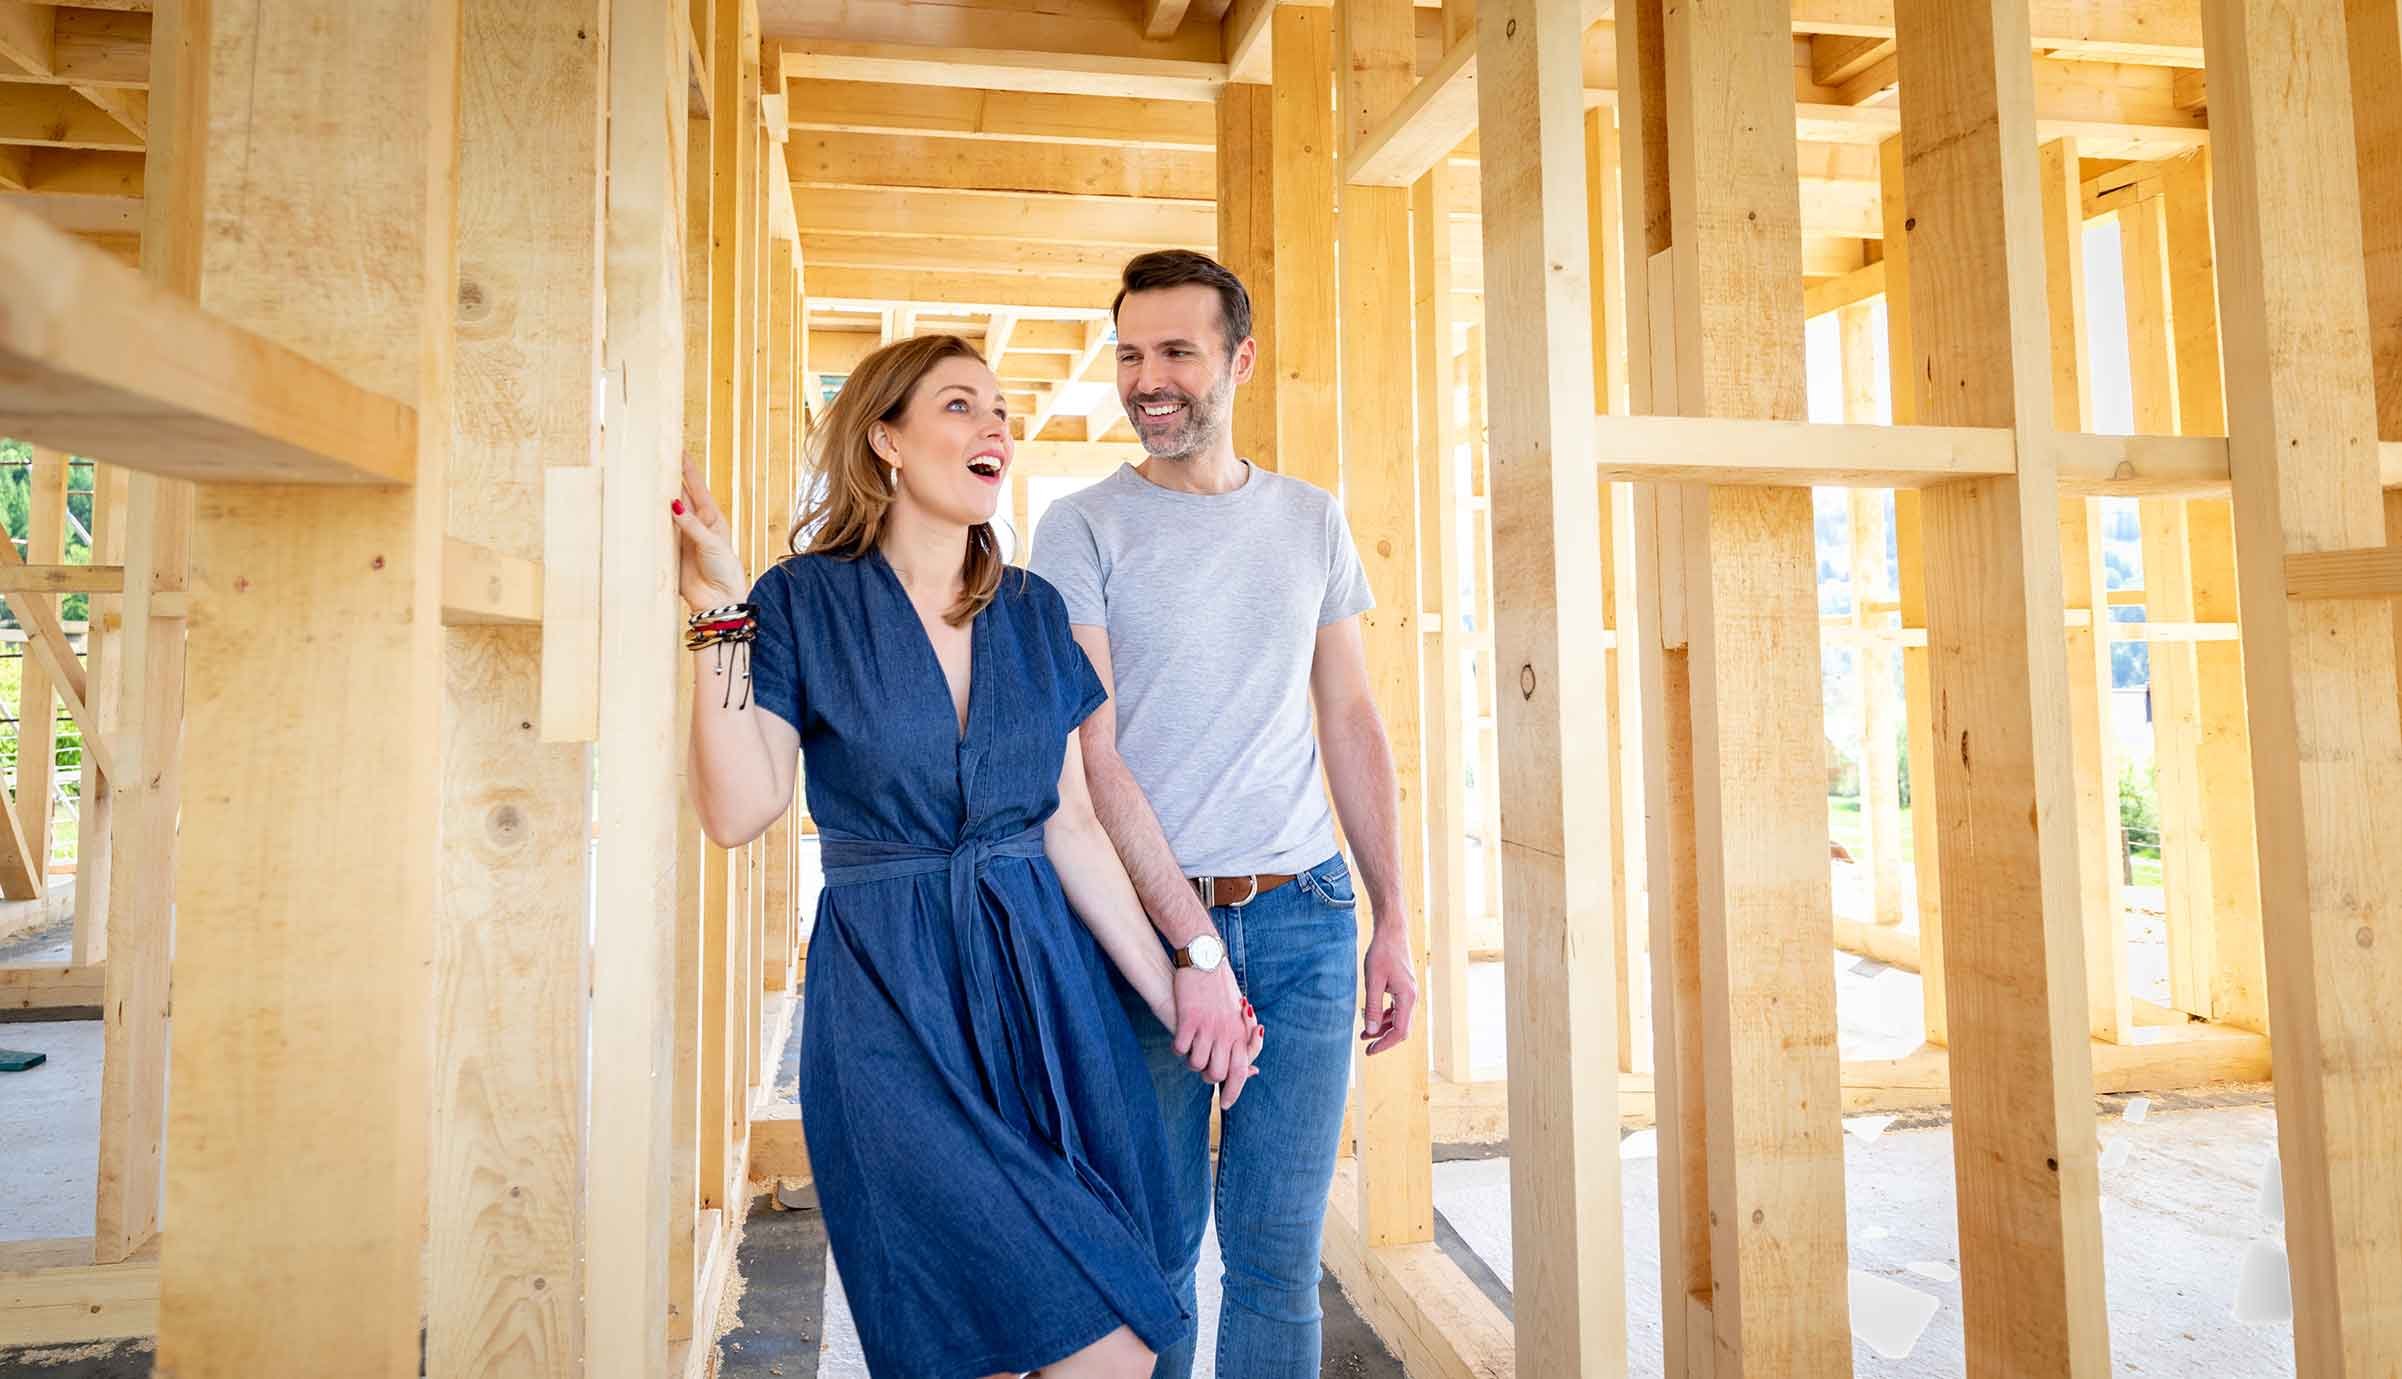 Smiling-couple-walking-through-a-home-under-construction-1